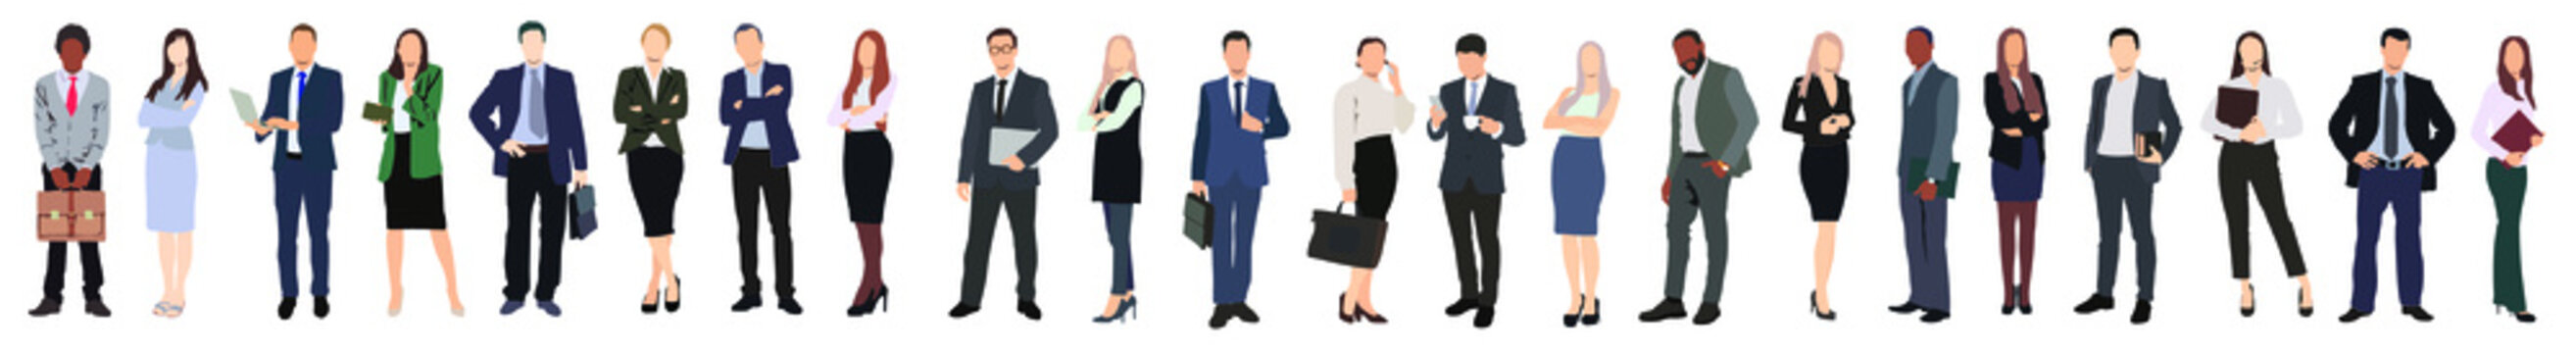 set of business people standing in a row